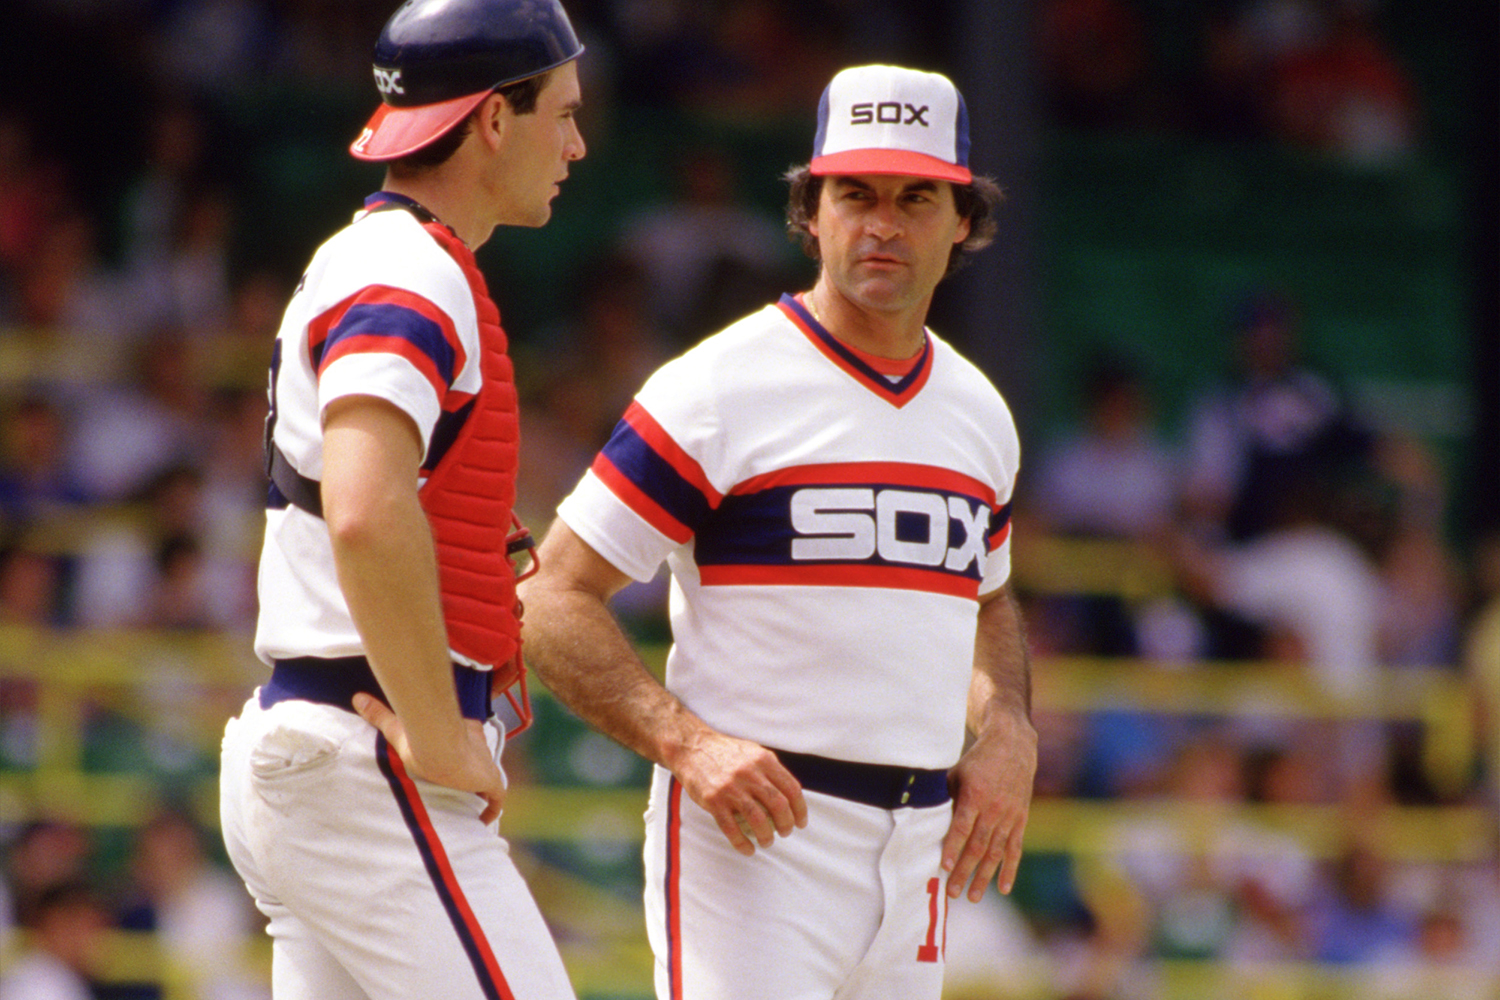 Manager Tony LaRussa of the Chicago White Sox looks on during an MLB game at Comiskey Park in Chicago, Illinois during the 1986 season 